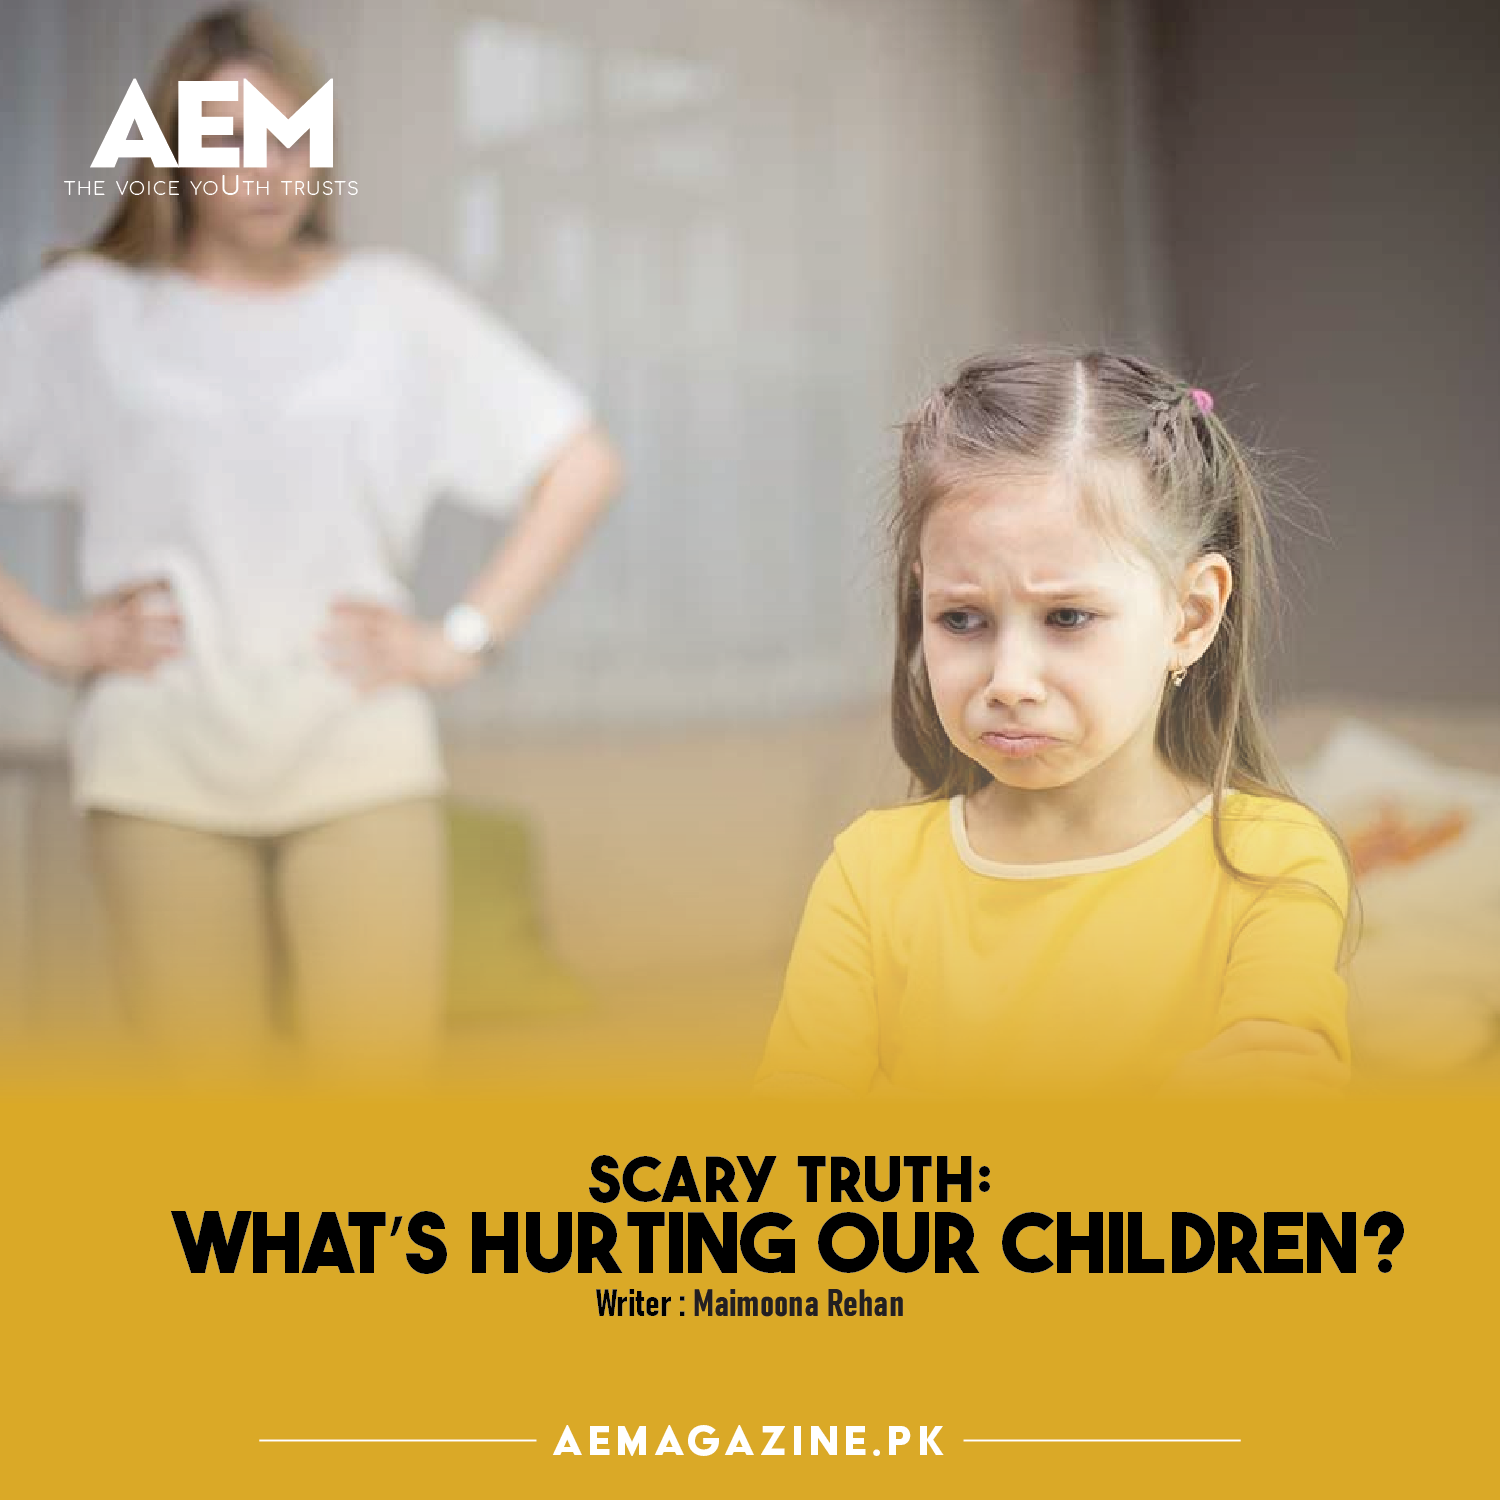 Scary Truth: What’s Hurting Our Children?